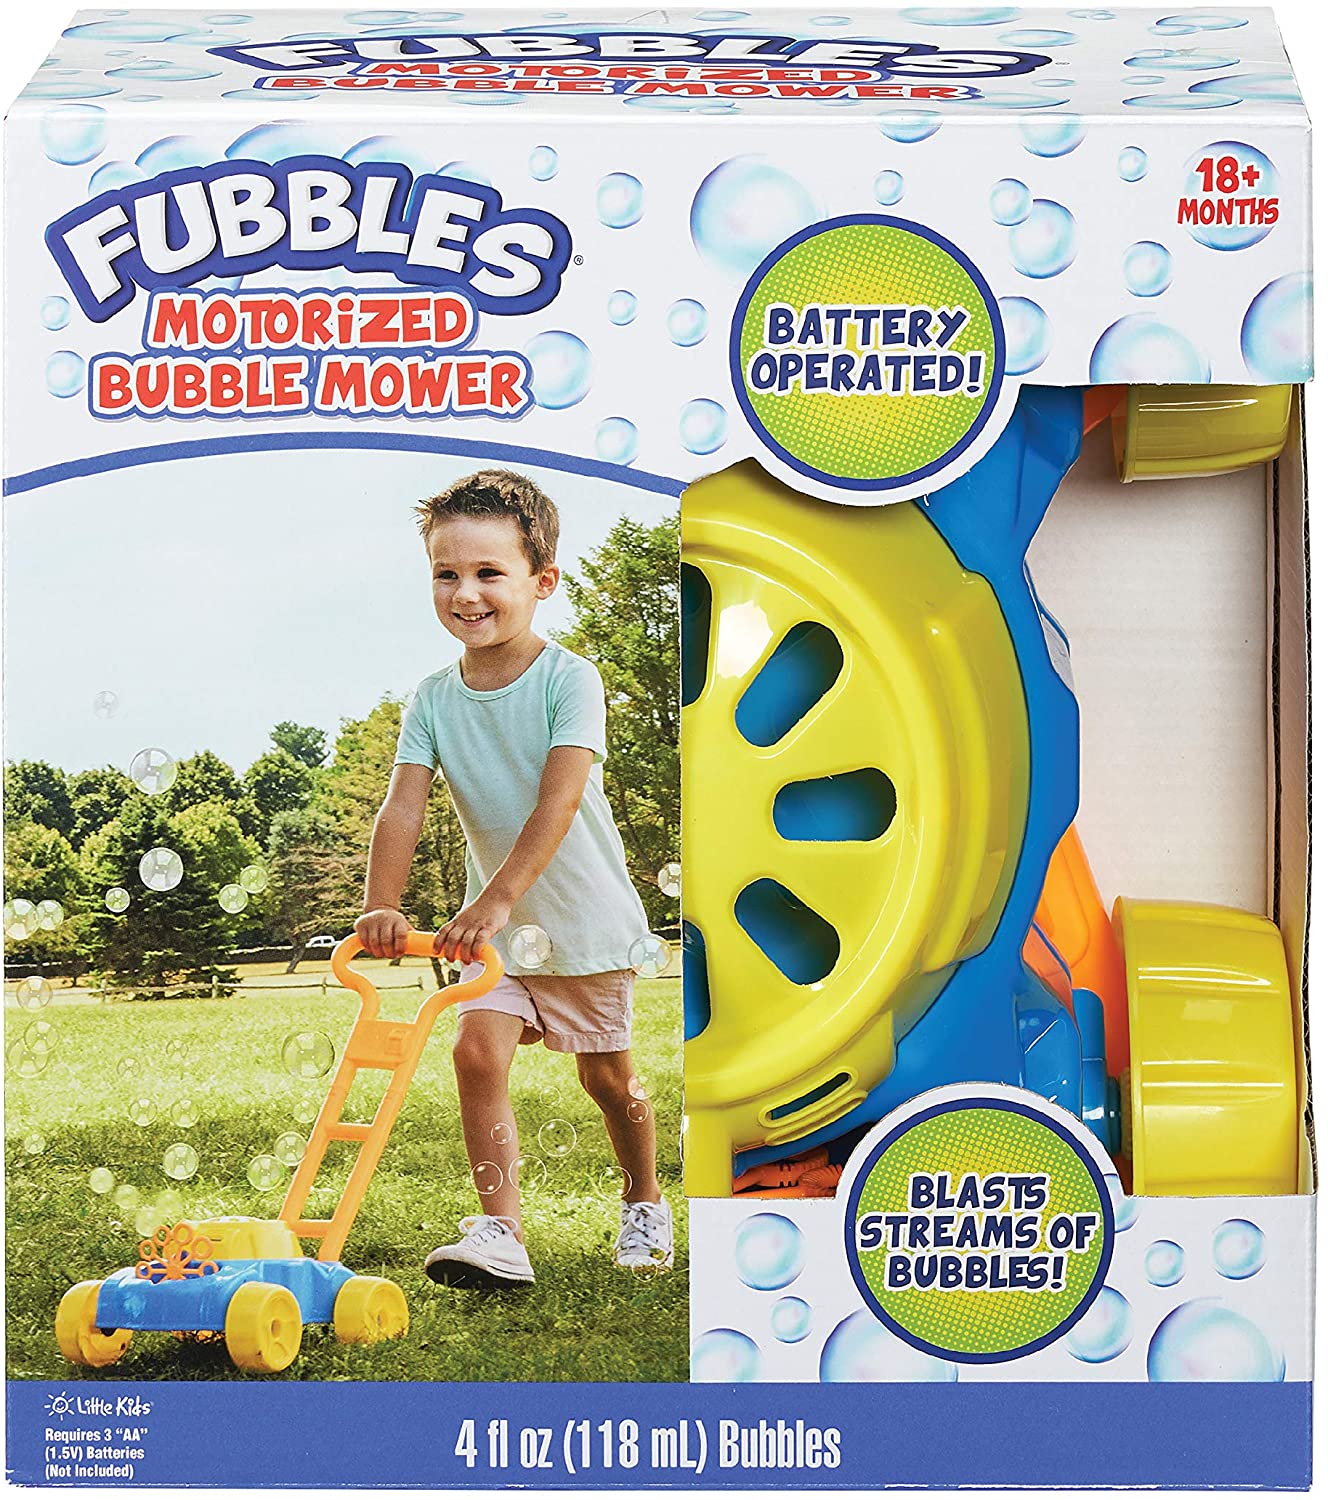 Fubbles® No-Spill® Bubble Mower – Growing Tree Toys